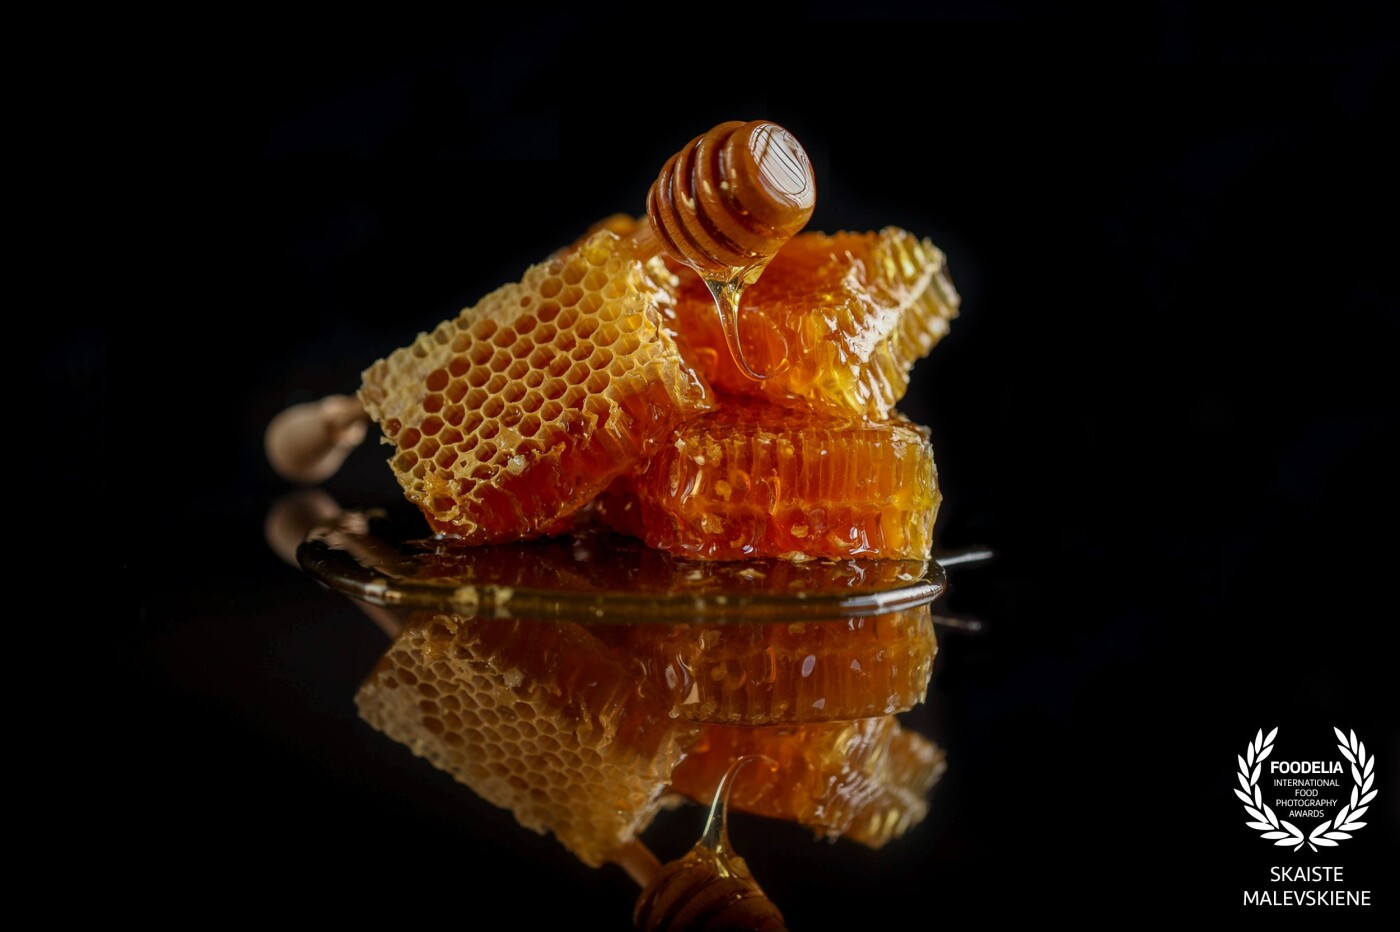 Beautiful textures of fresh honey and the honeycomb. The liquid gold of nature. I wanted to capture it in a luxurious way to reflect its beauty and grace.